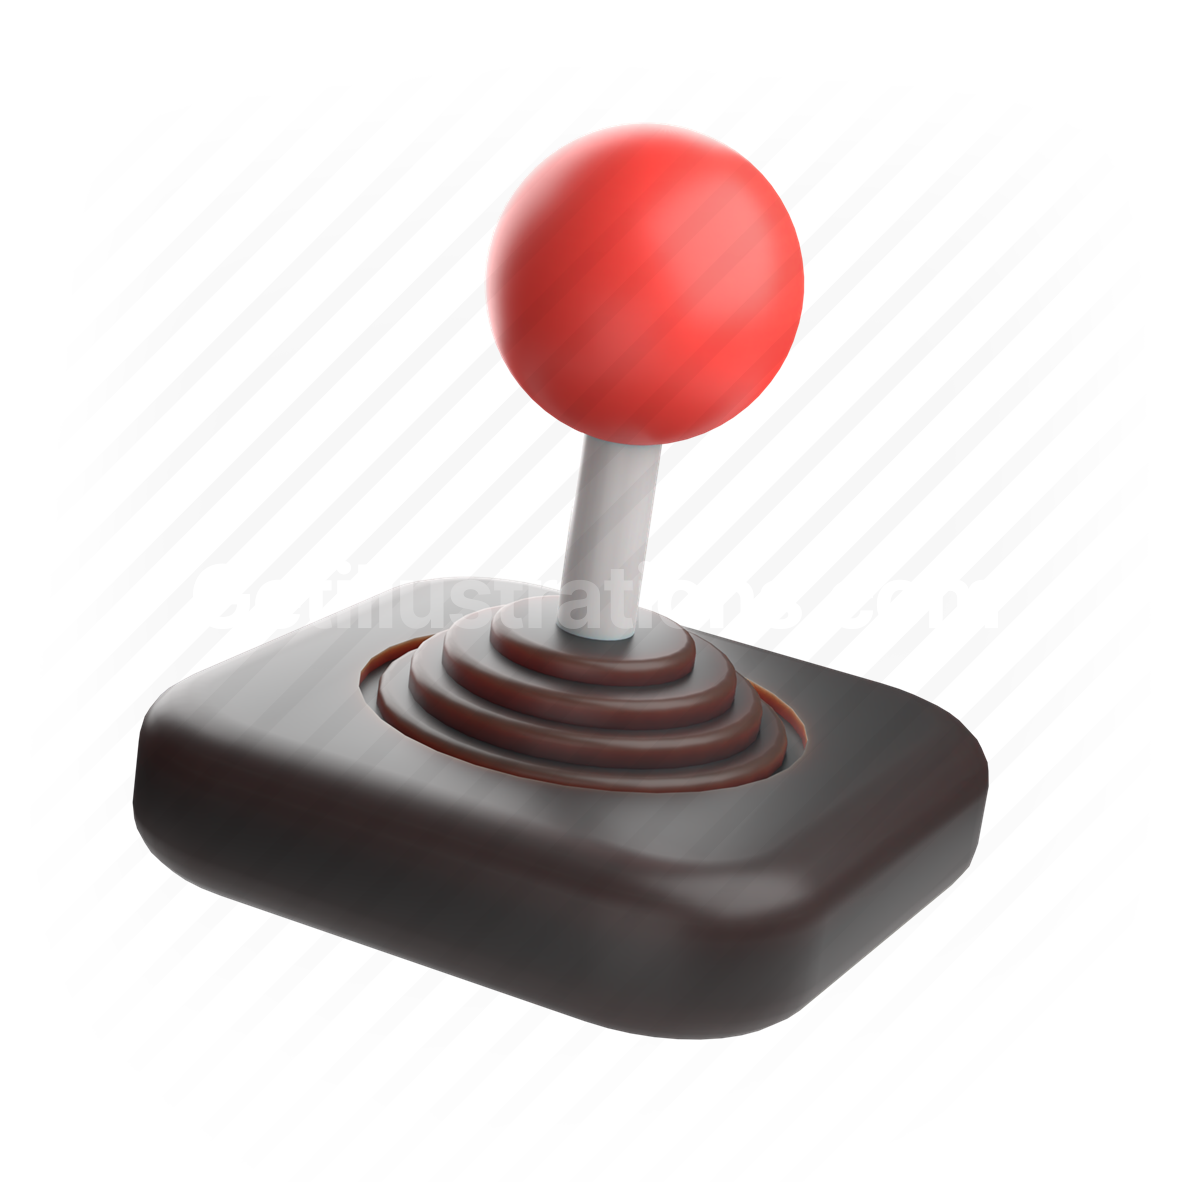 joystick, control, controller, move, movement, game, gaming, video game